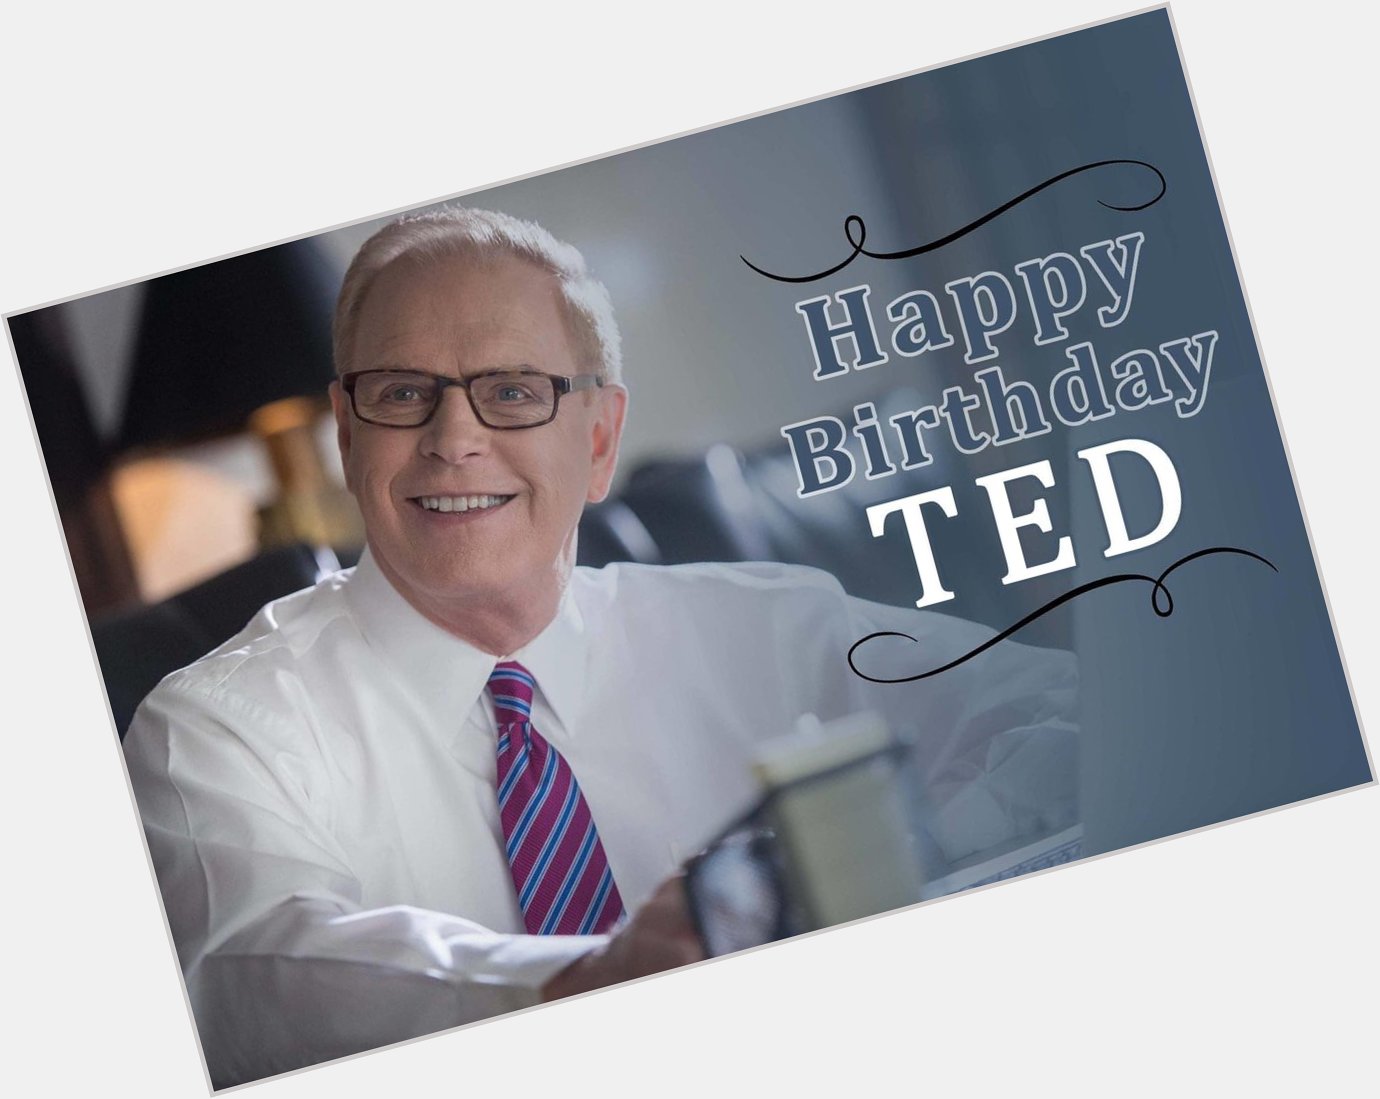 Happy Birthday Gov. Thank you for continuing to support candidates like myself across Ohio! 